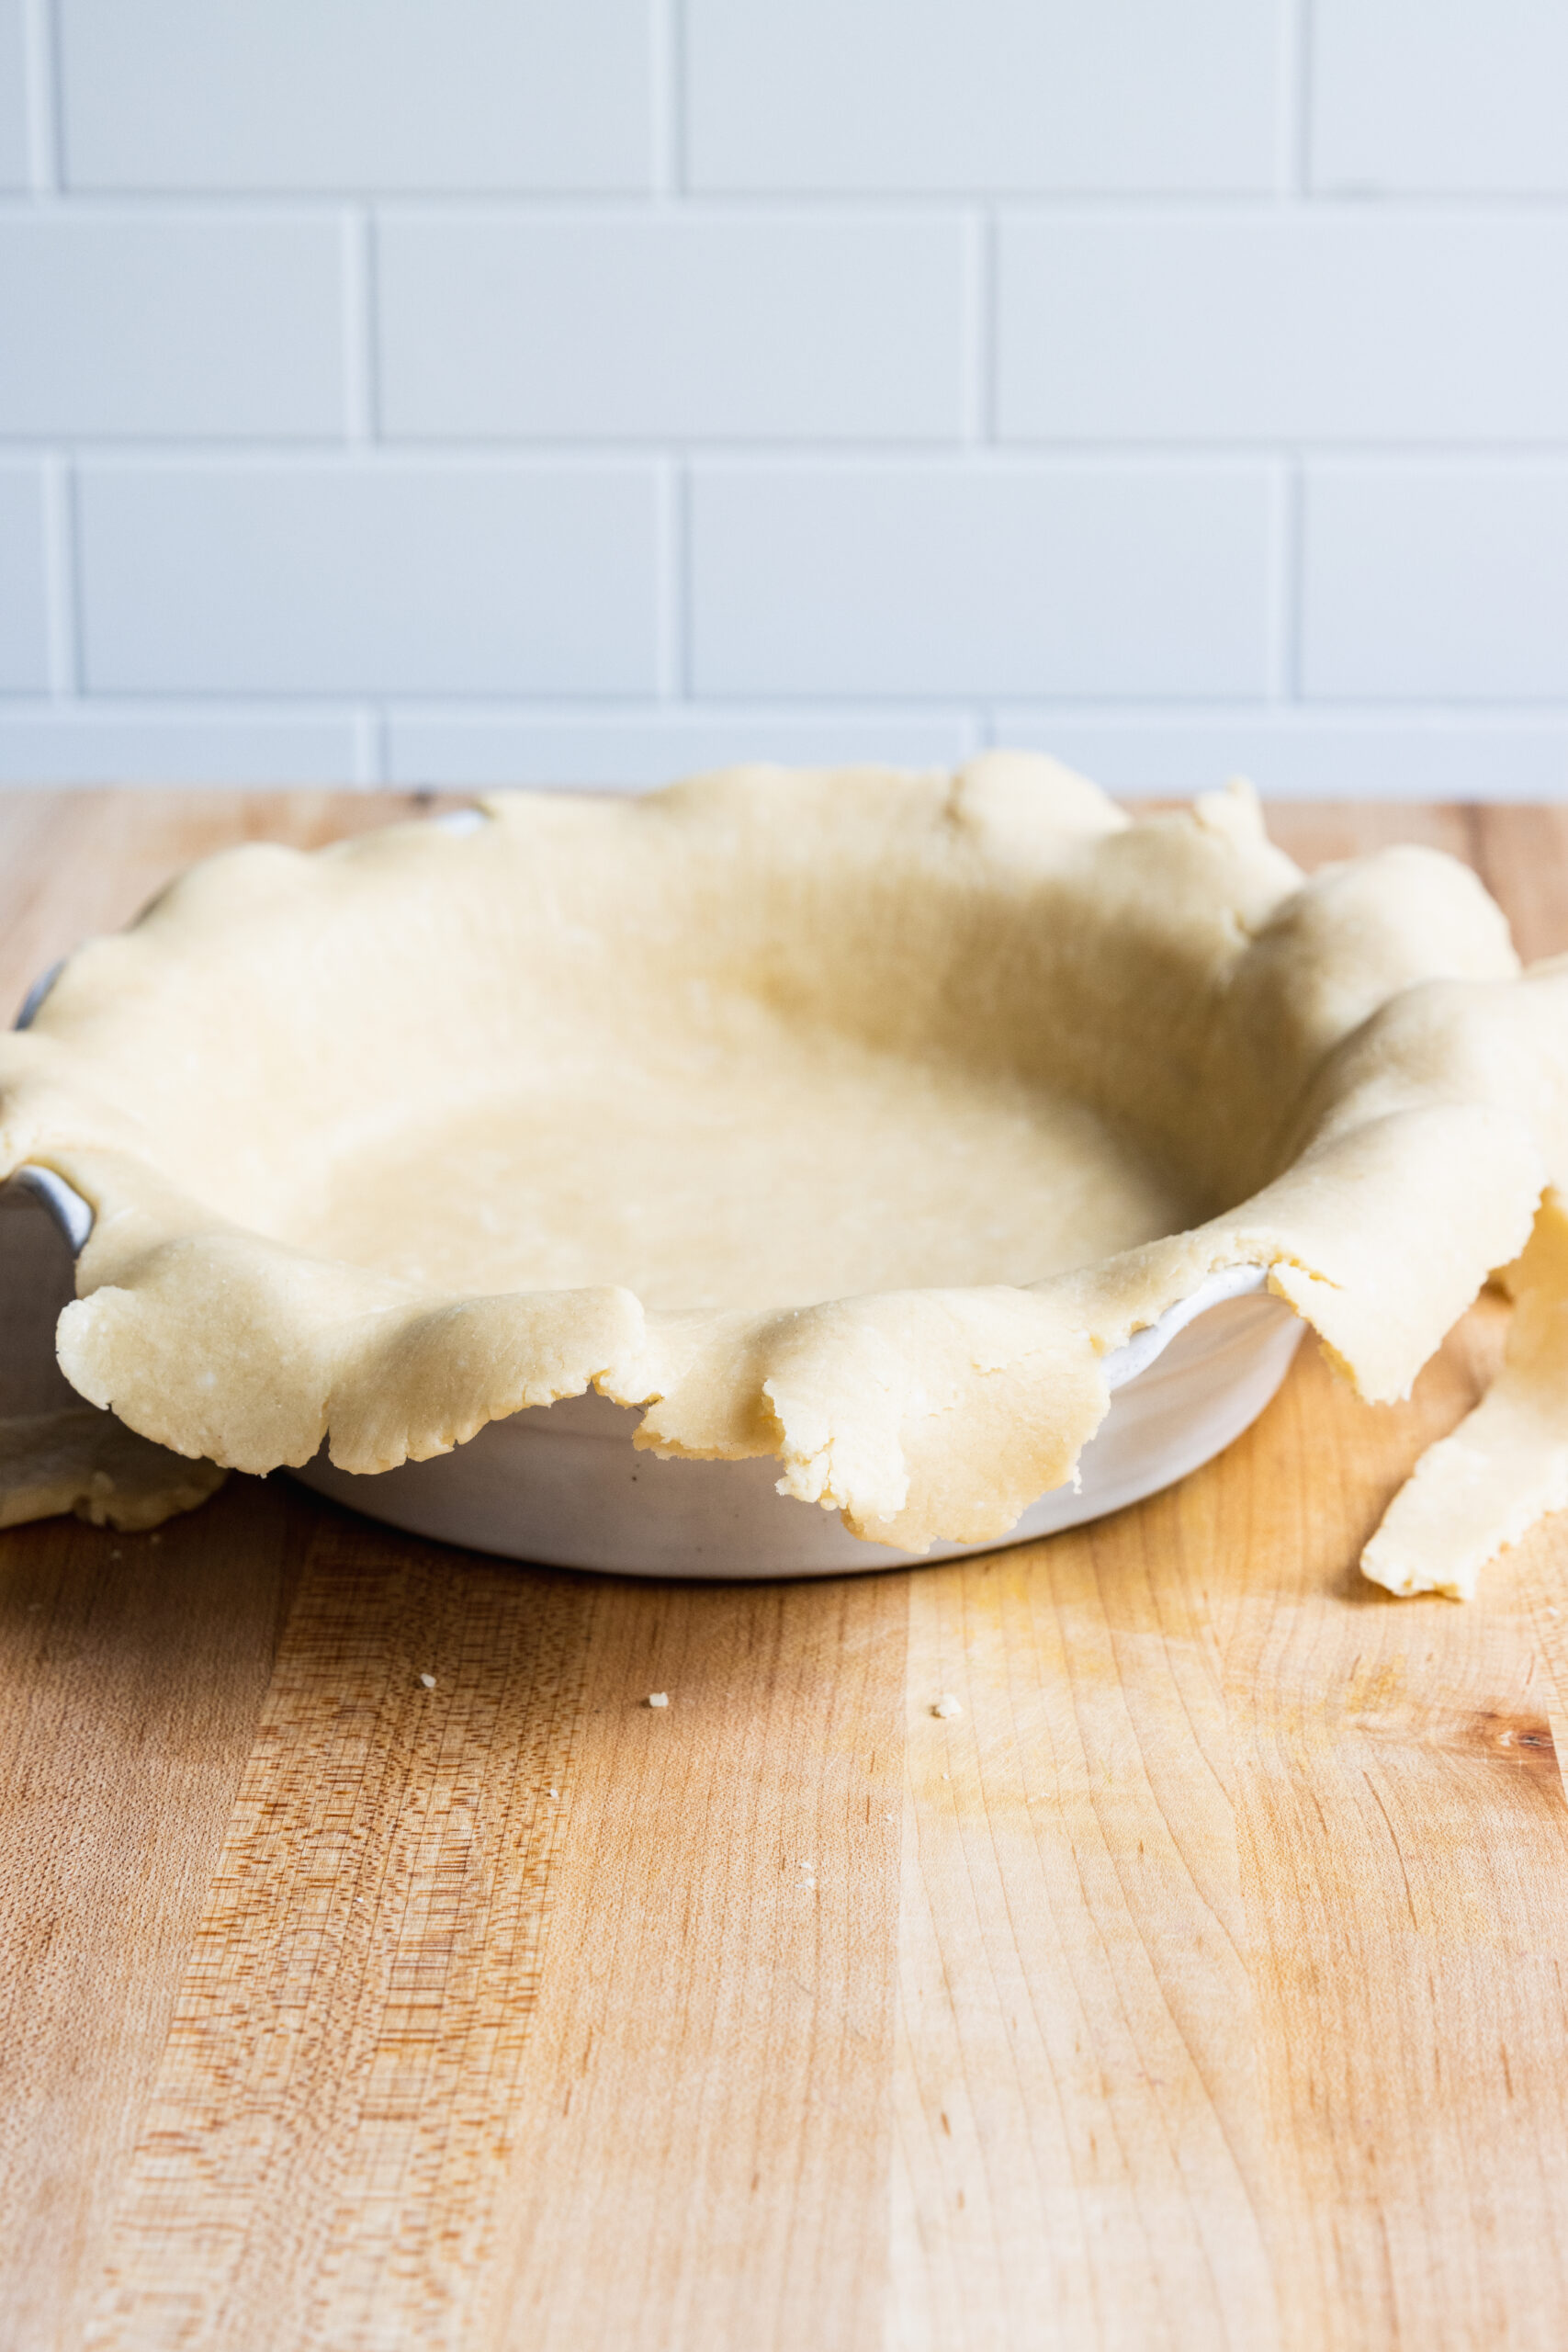 Unbaked pie crust ready to be shaped